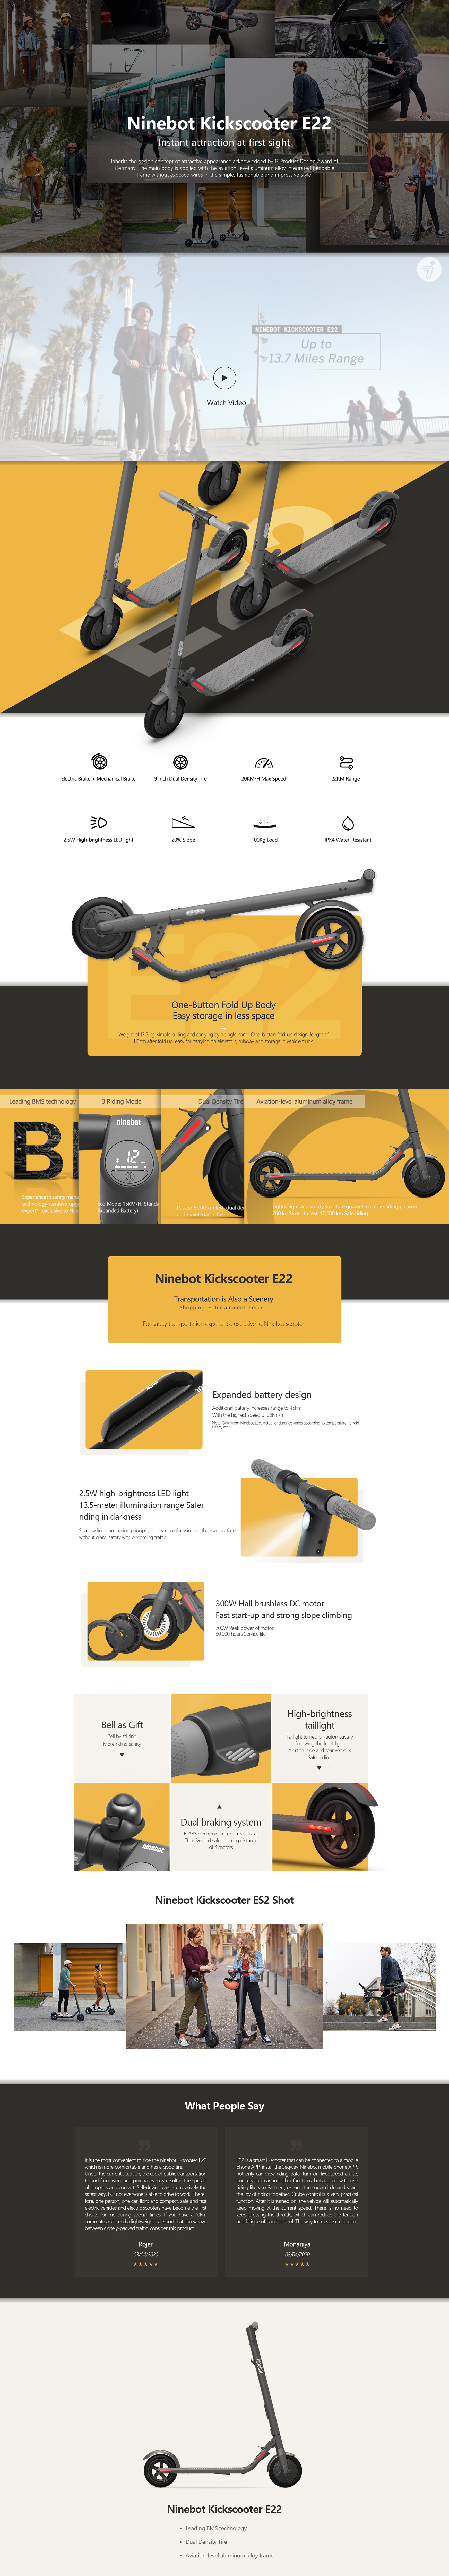 E22 Product page.jpg